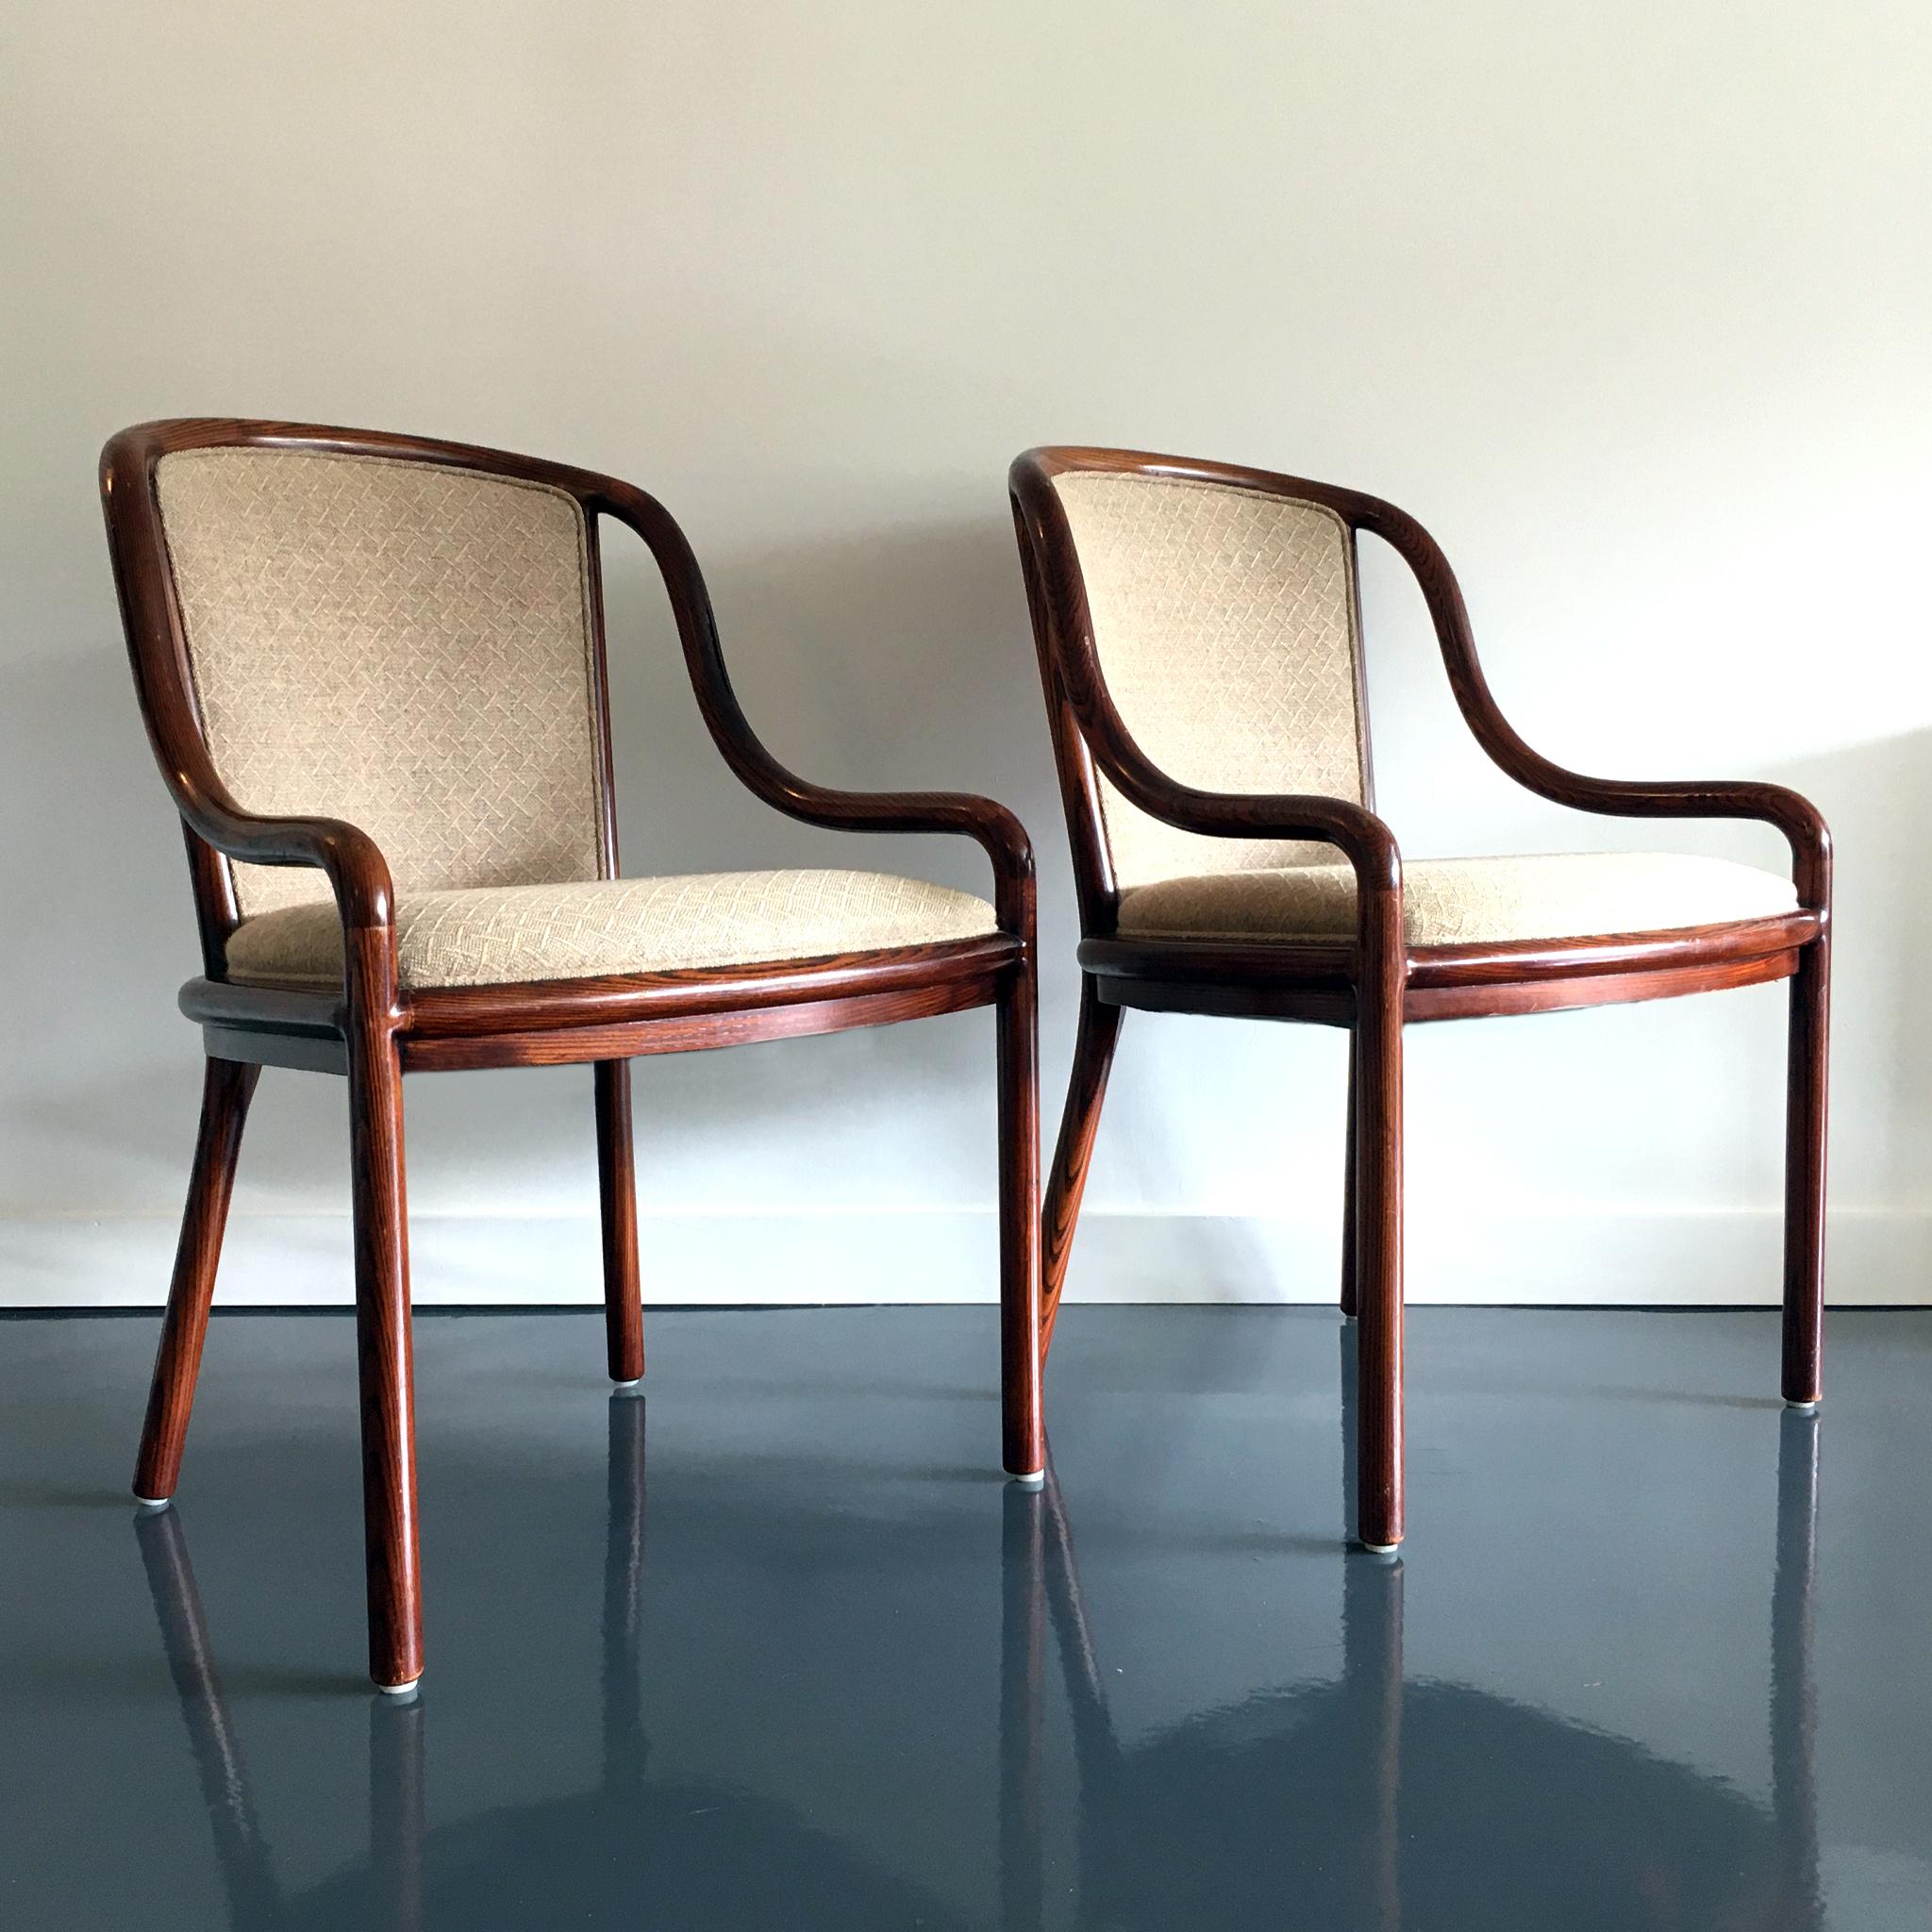 Designed by Ward Bennett for Brickel Associates, elegant armchairs. Made from ash wood and stained in a walnut finish. Marked with makers tag. Sold as a pair.